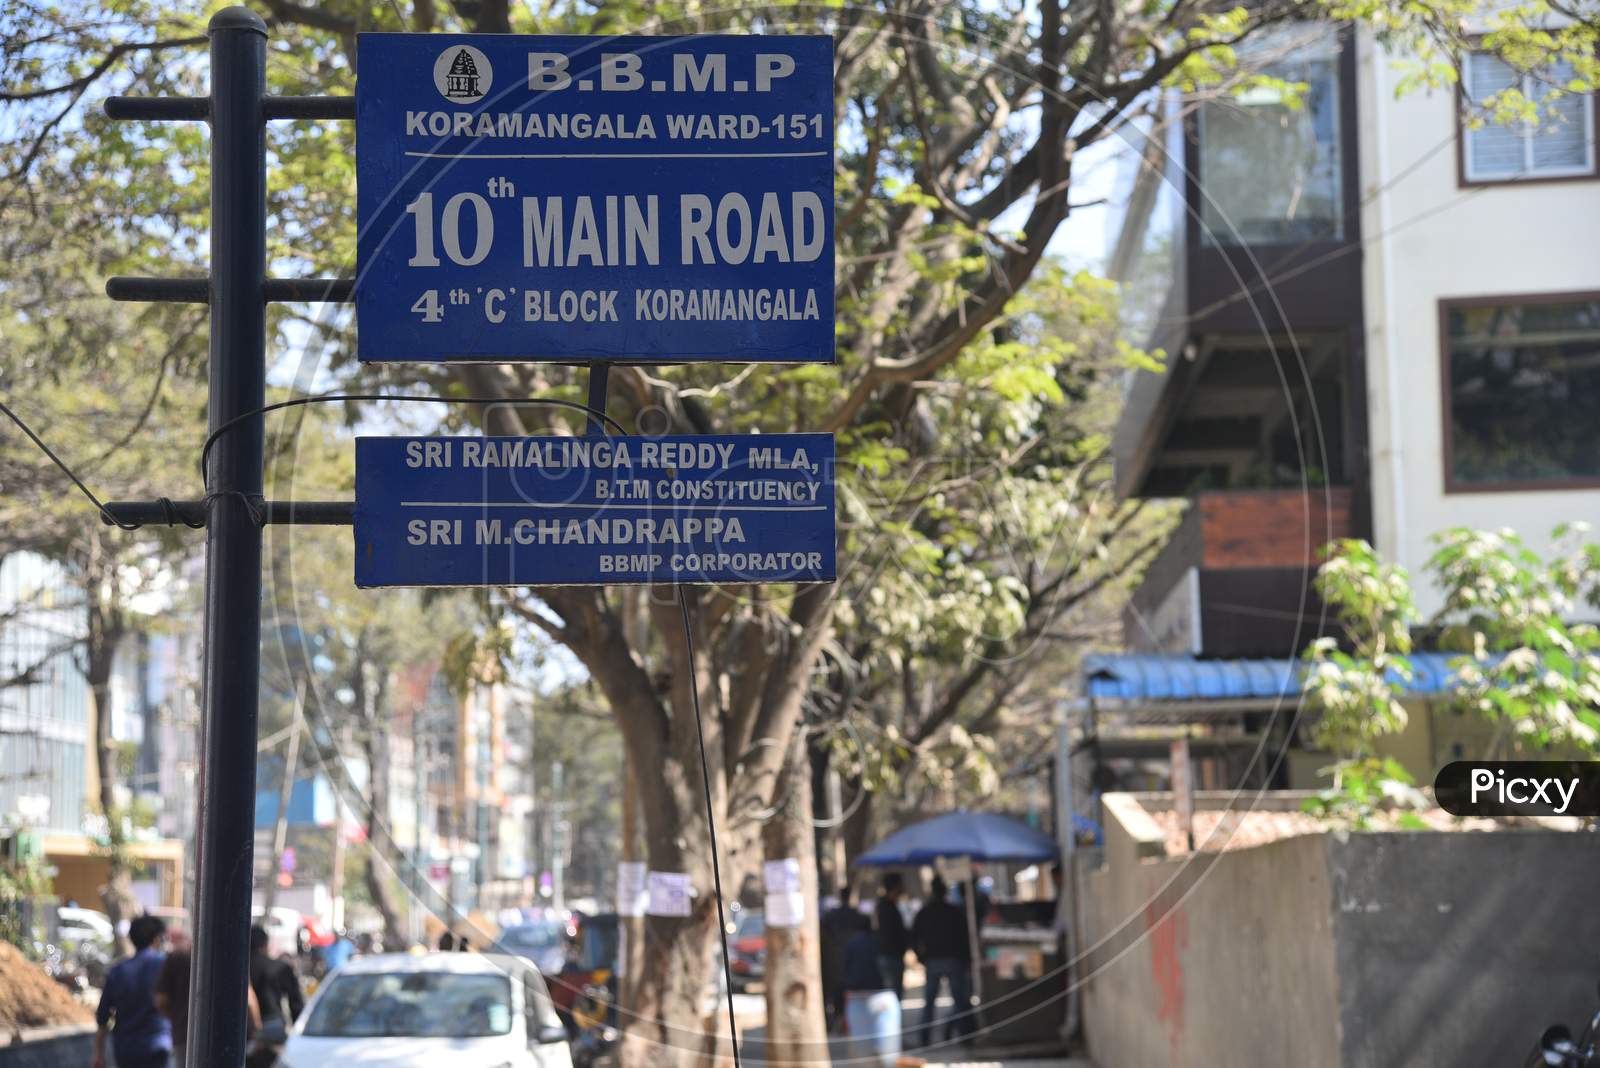 BBMP road information boards in streets